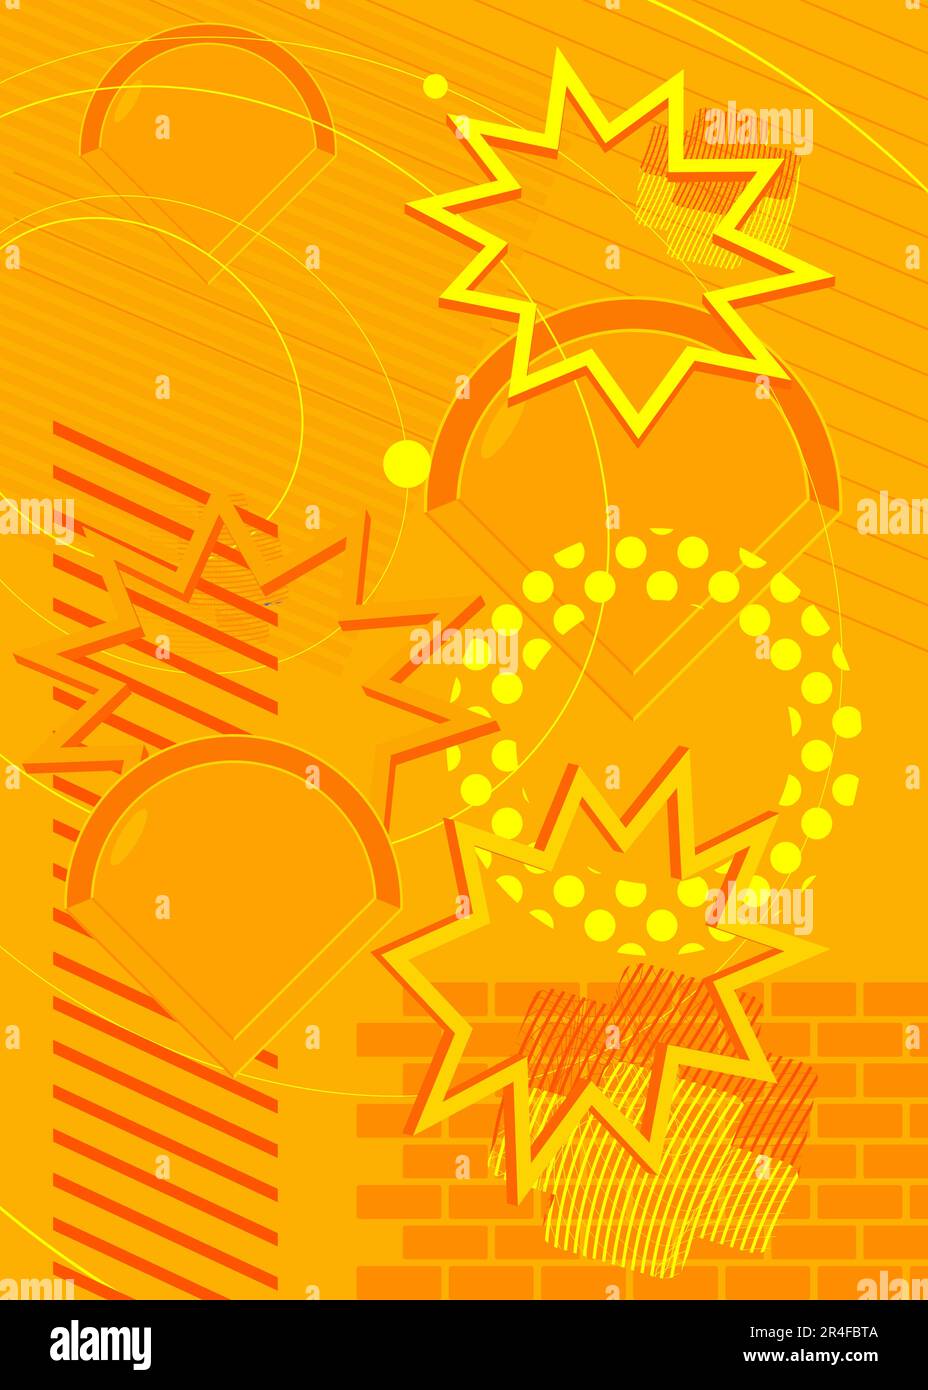 Yellow simple geometric vector banner, poster. Vibrant old geometrical shapes background. Abstract retro graphic busy psychodelic volumetric art illus Stock Vector